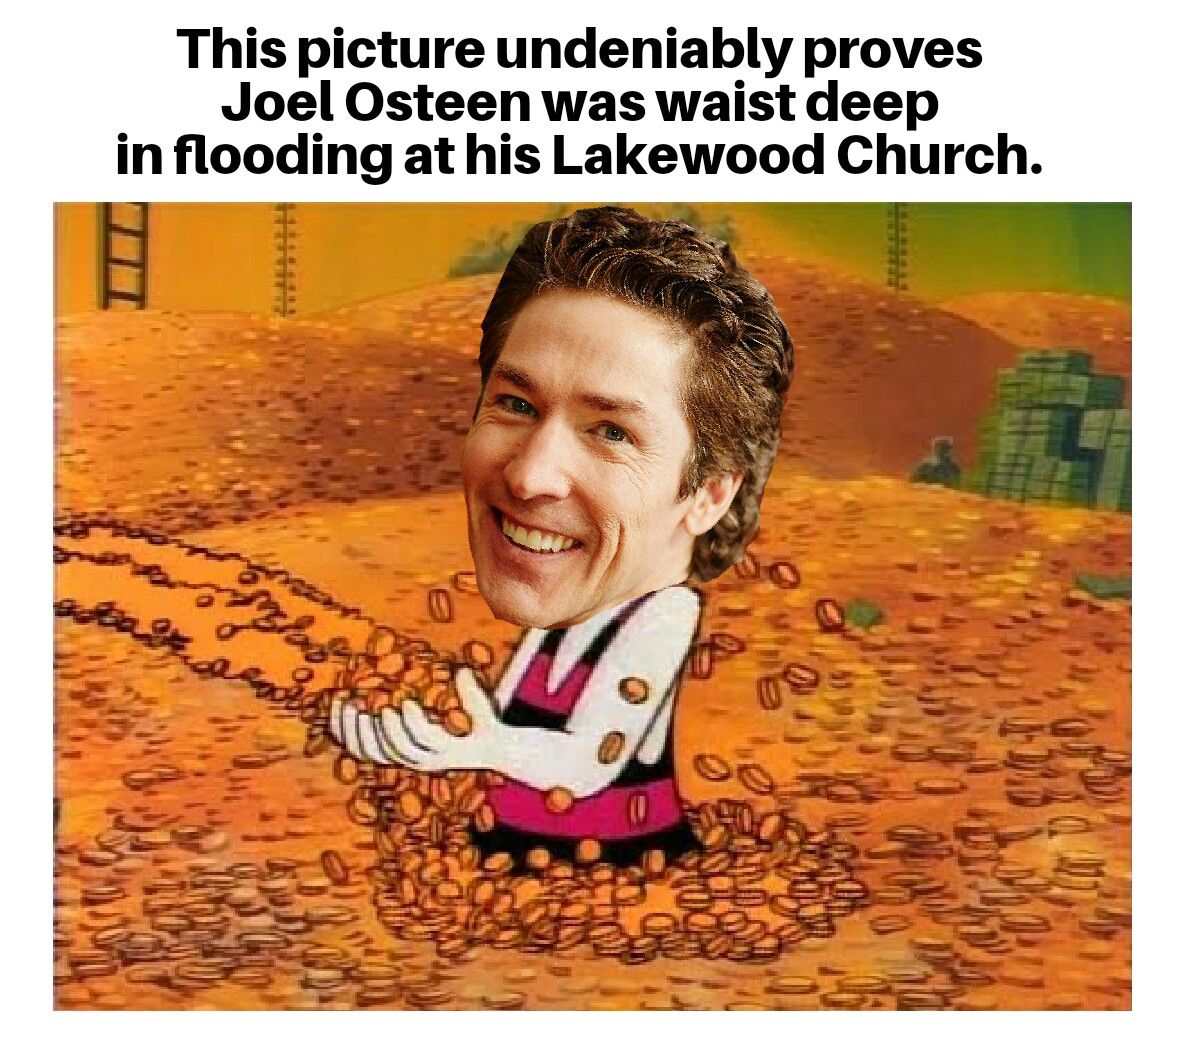 scrooge mcduck money swim - This picture undeniably proves Joel Osteen was waist deep in flooding at his Lakewood Church.